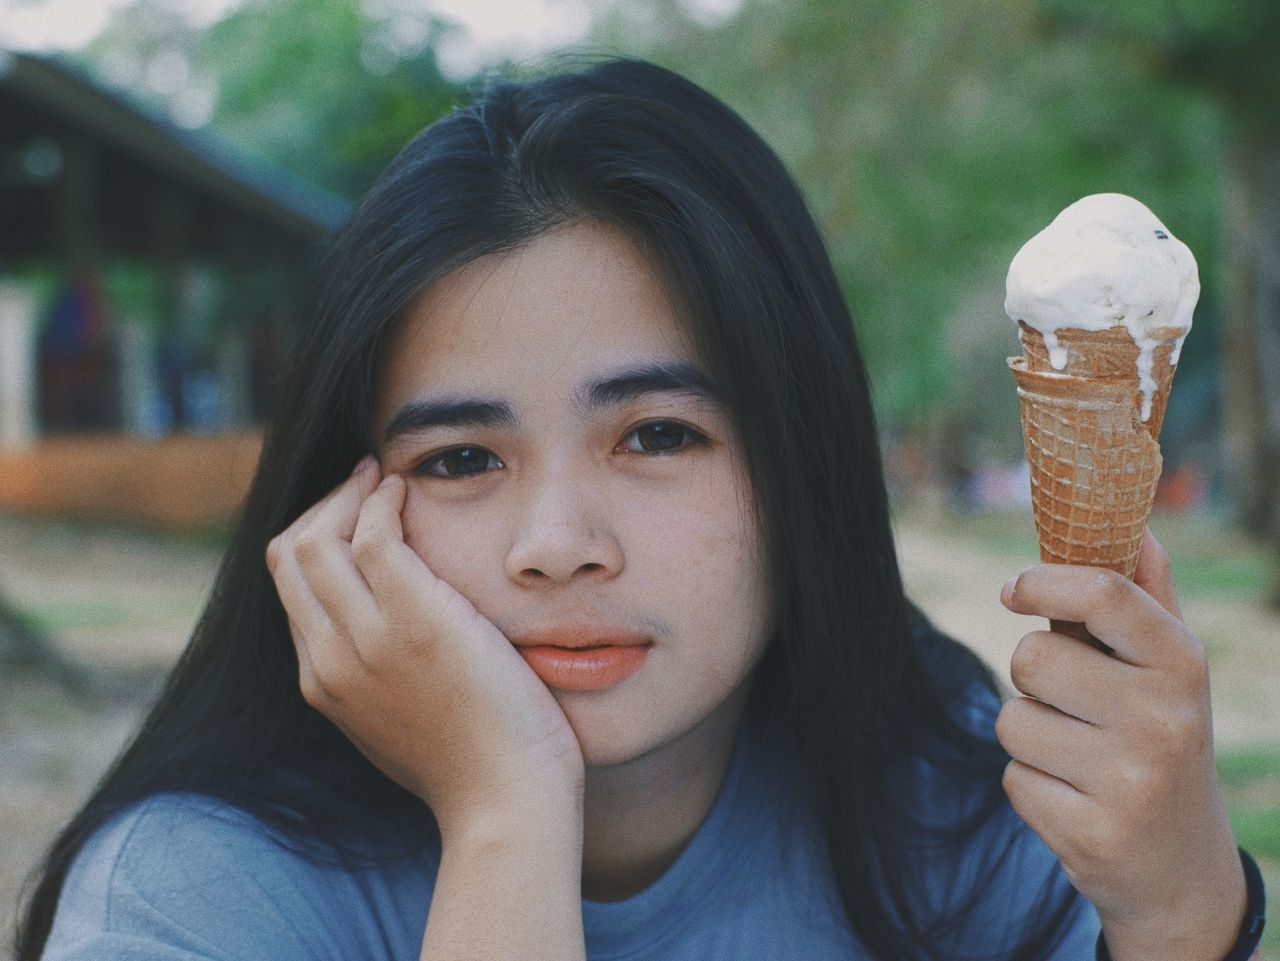 portrait, one person, headshot, front view, real people, focus on foreground, sweet, sweet food, ice cream, frozen food, frozen, holding, looking at camera, casual clothing, leisure activity, food and drink, dessert, lifestyles, hair, temptation, outdoors, hairstyle, teenager